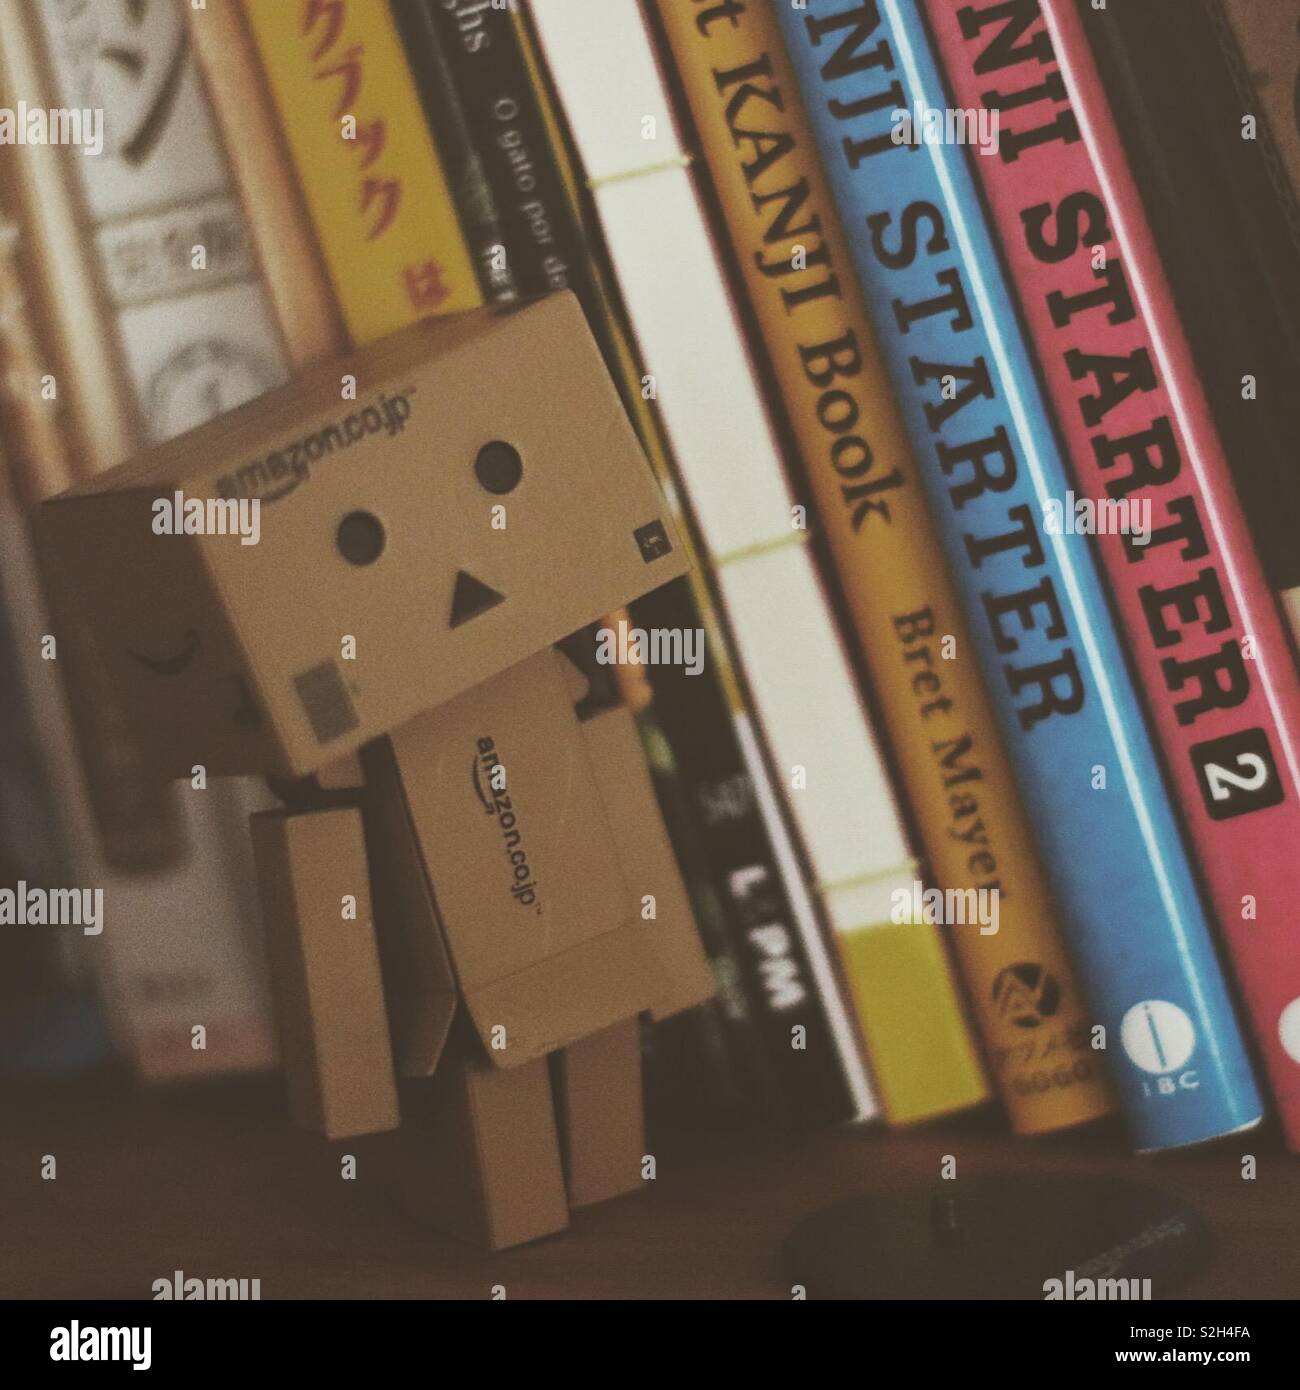 Danbo and Japanese books Stock Photo